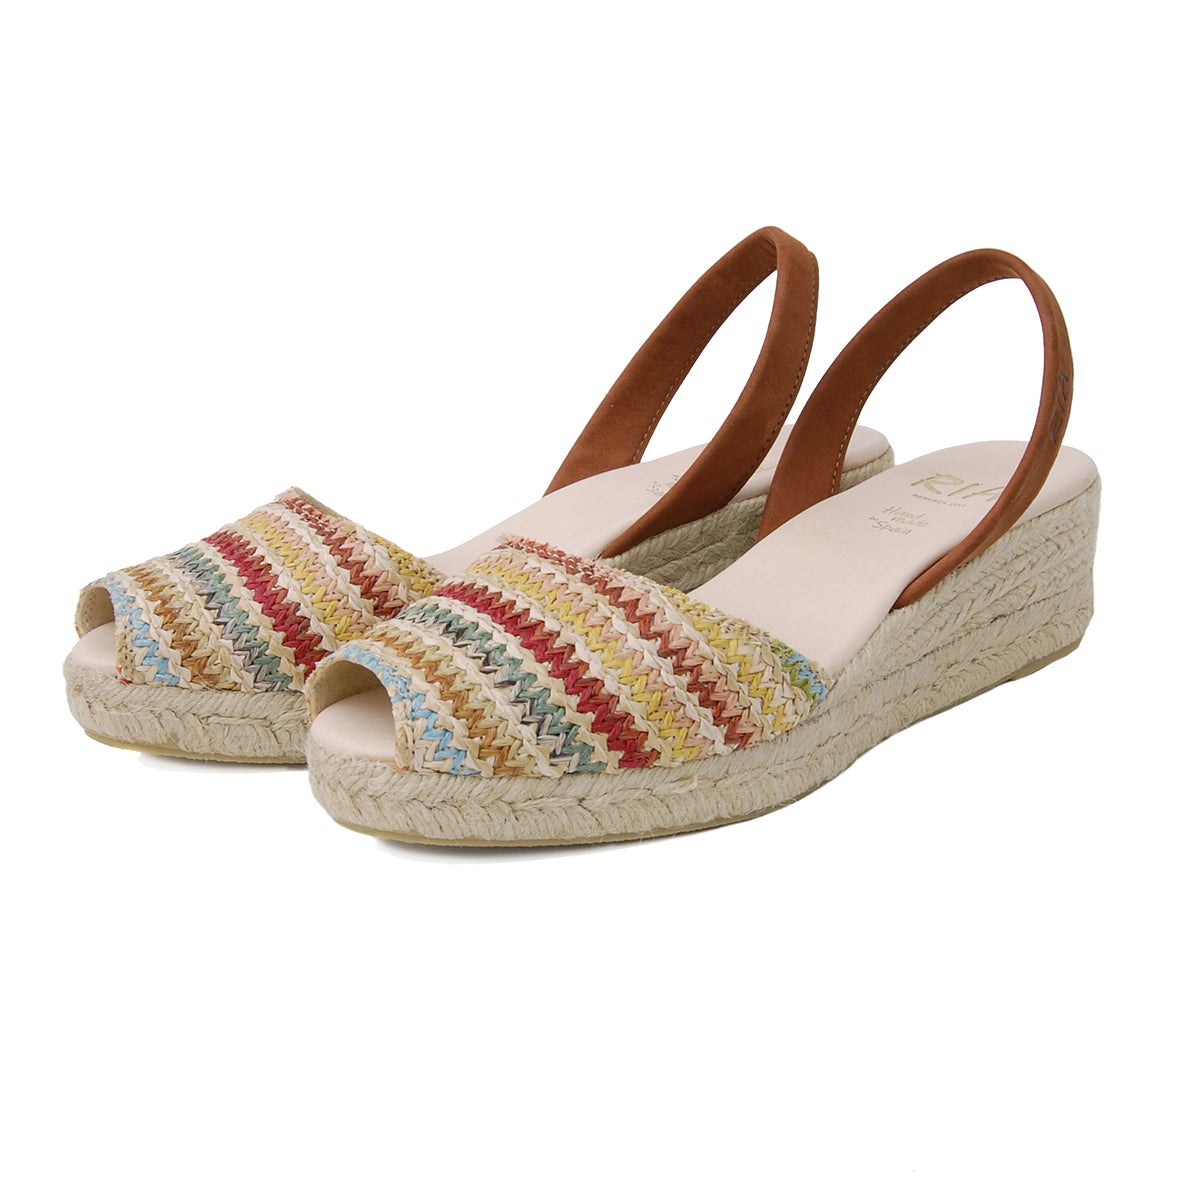 Parallel Culture Shoes and Fashion Online SHOES RIA MENORCA TUNDRA WEDGE